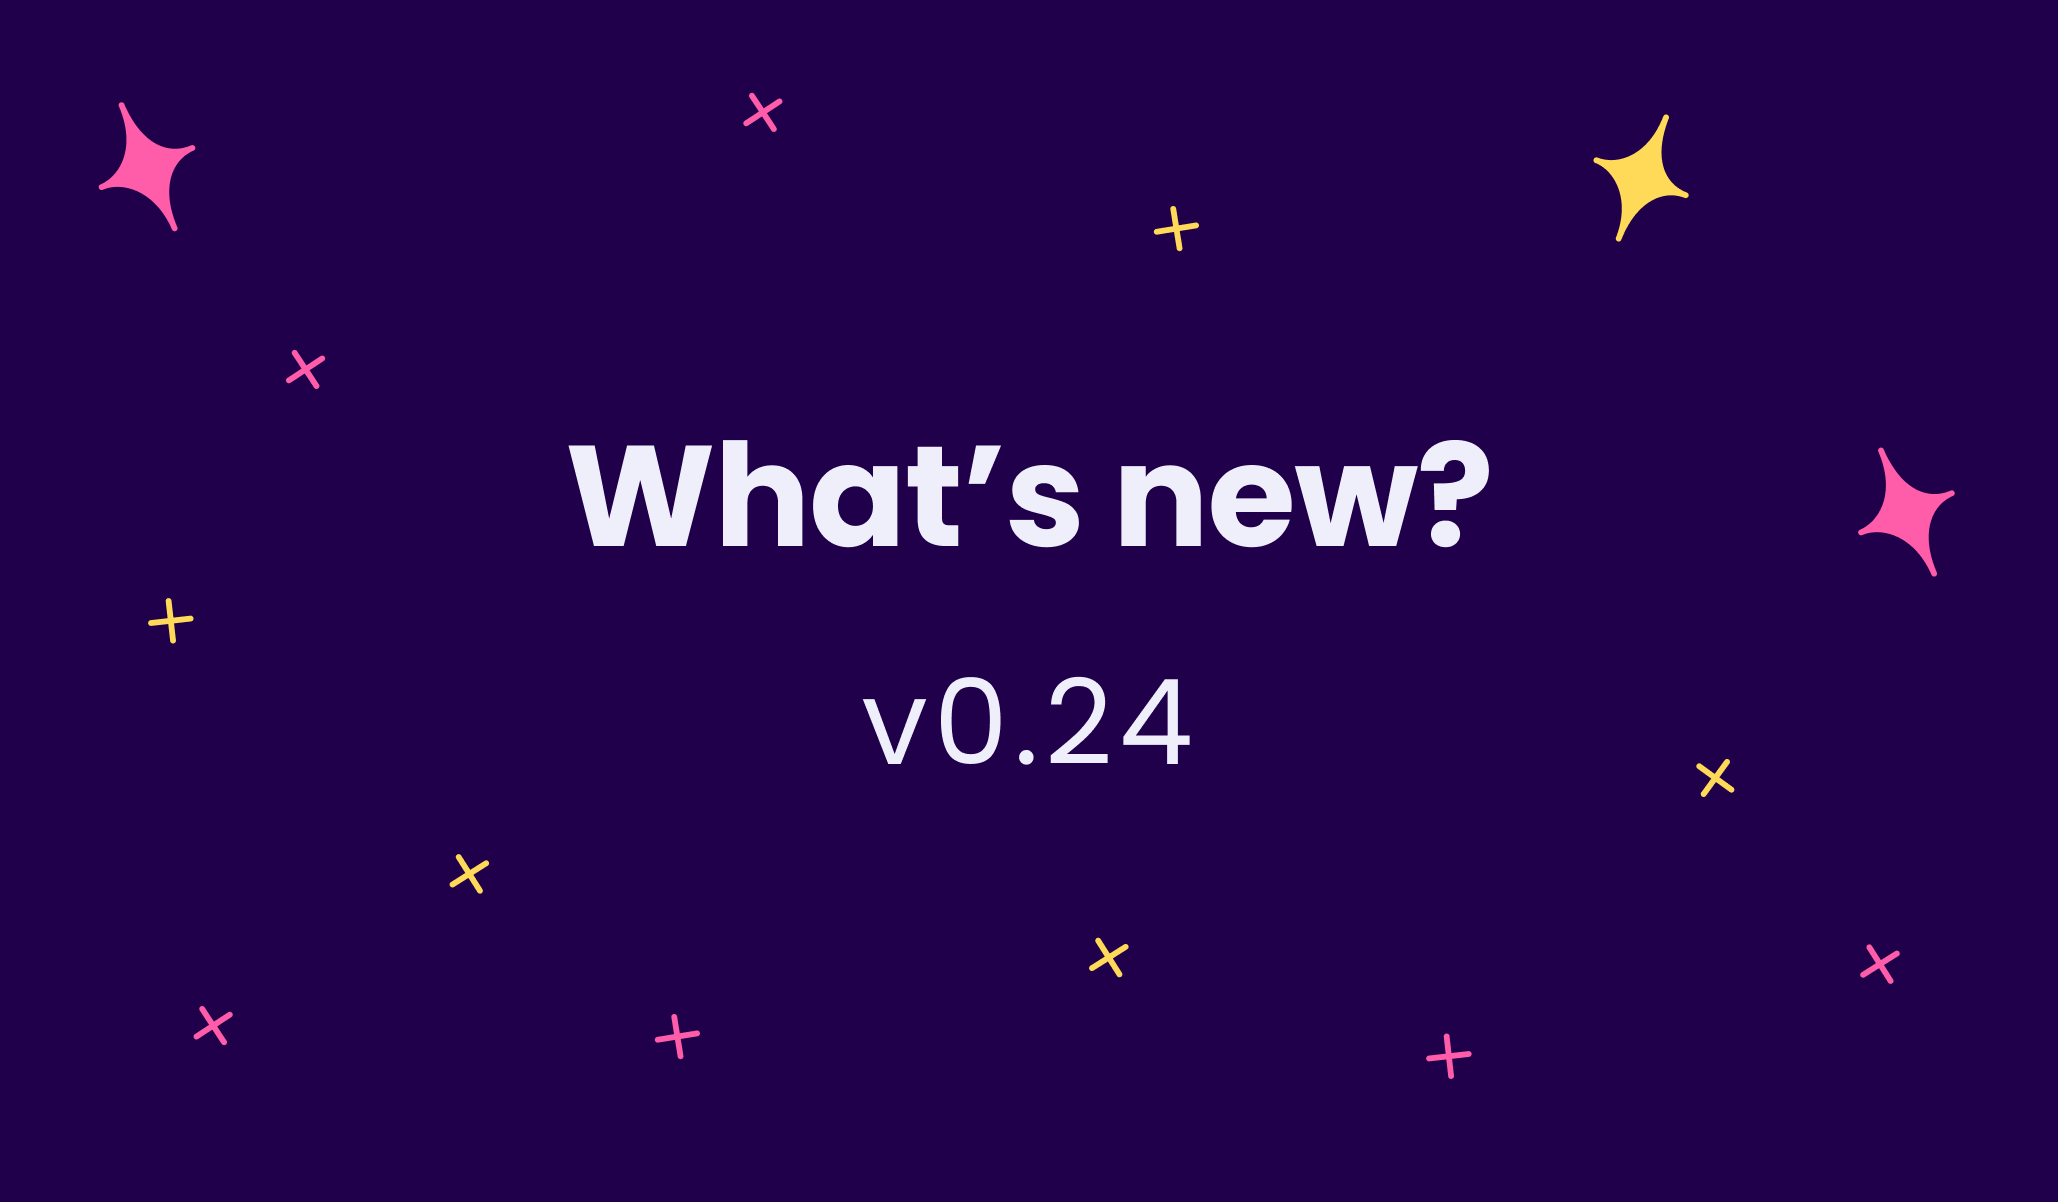 What's new in v0.24